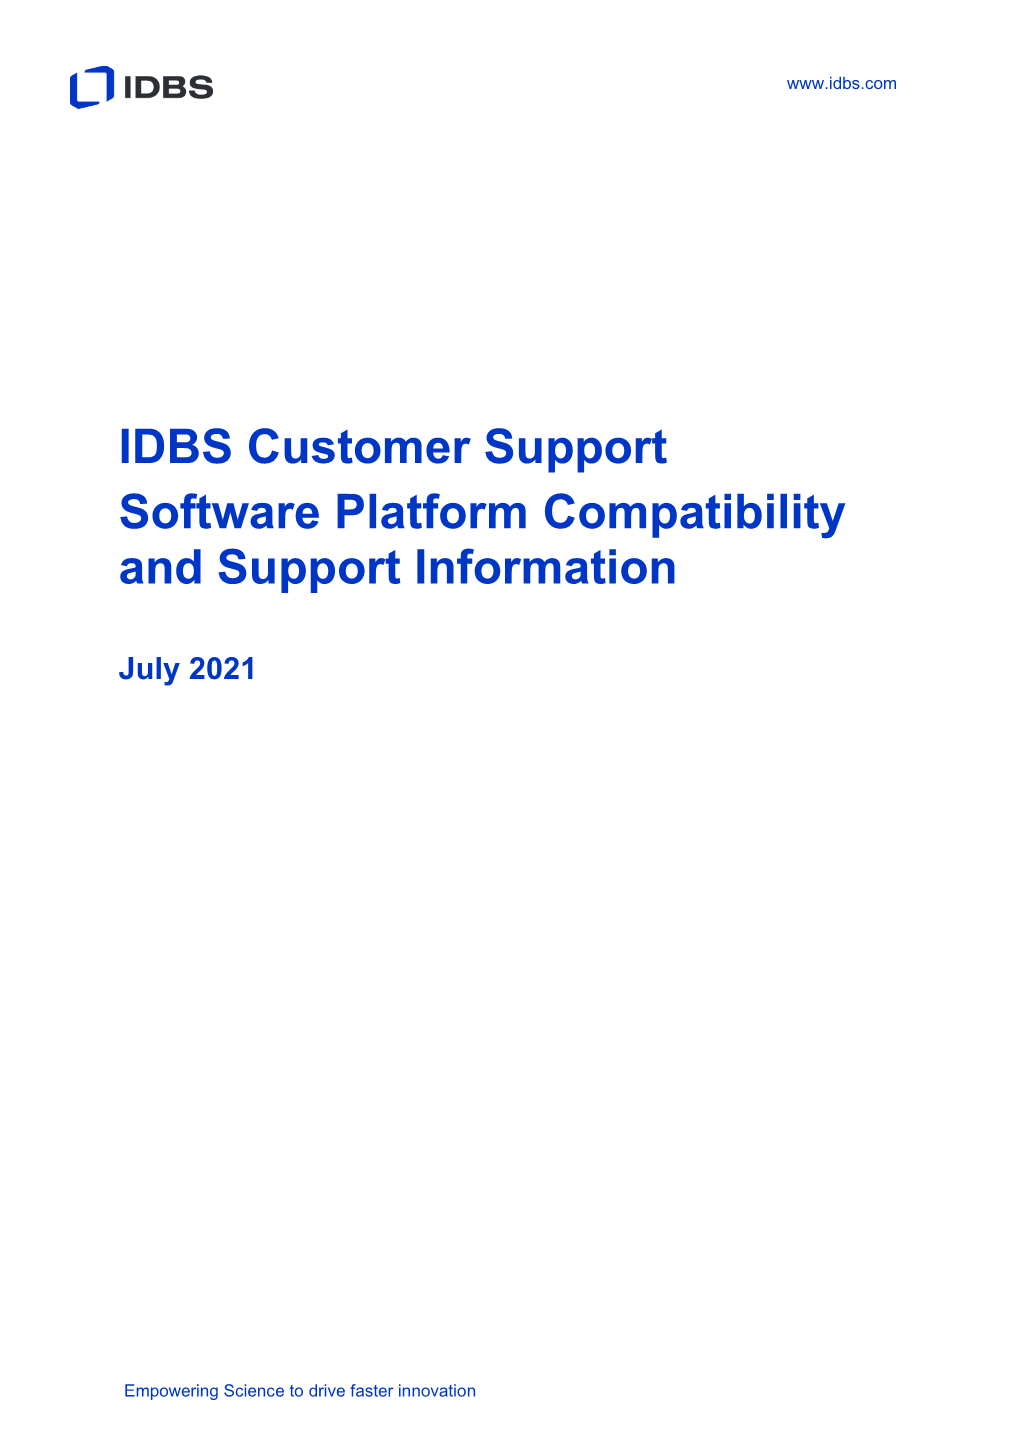 IDBS Platform Software Compatibility and Support Information